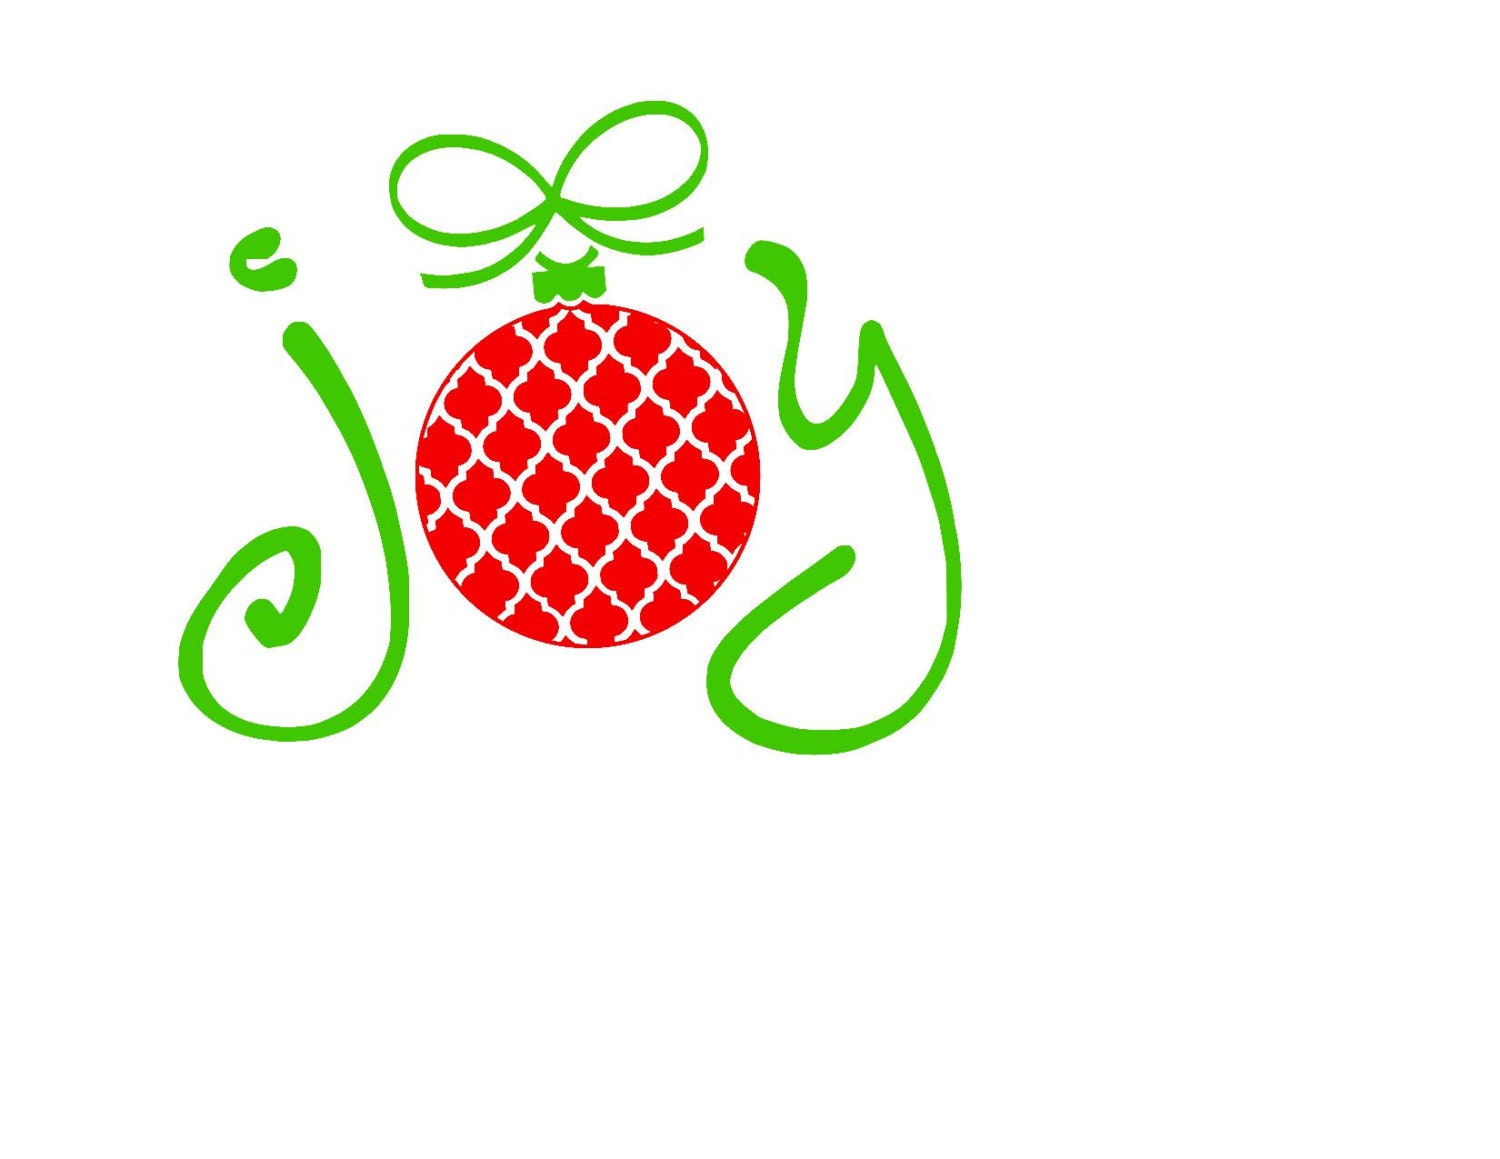 Tagschristmas, christmas ornament, free svg, free vector art, inkscape. 